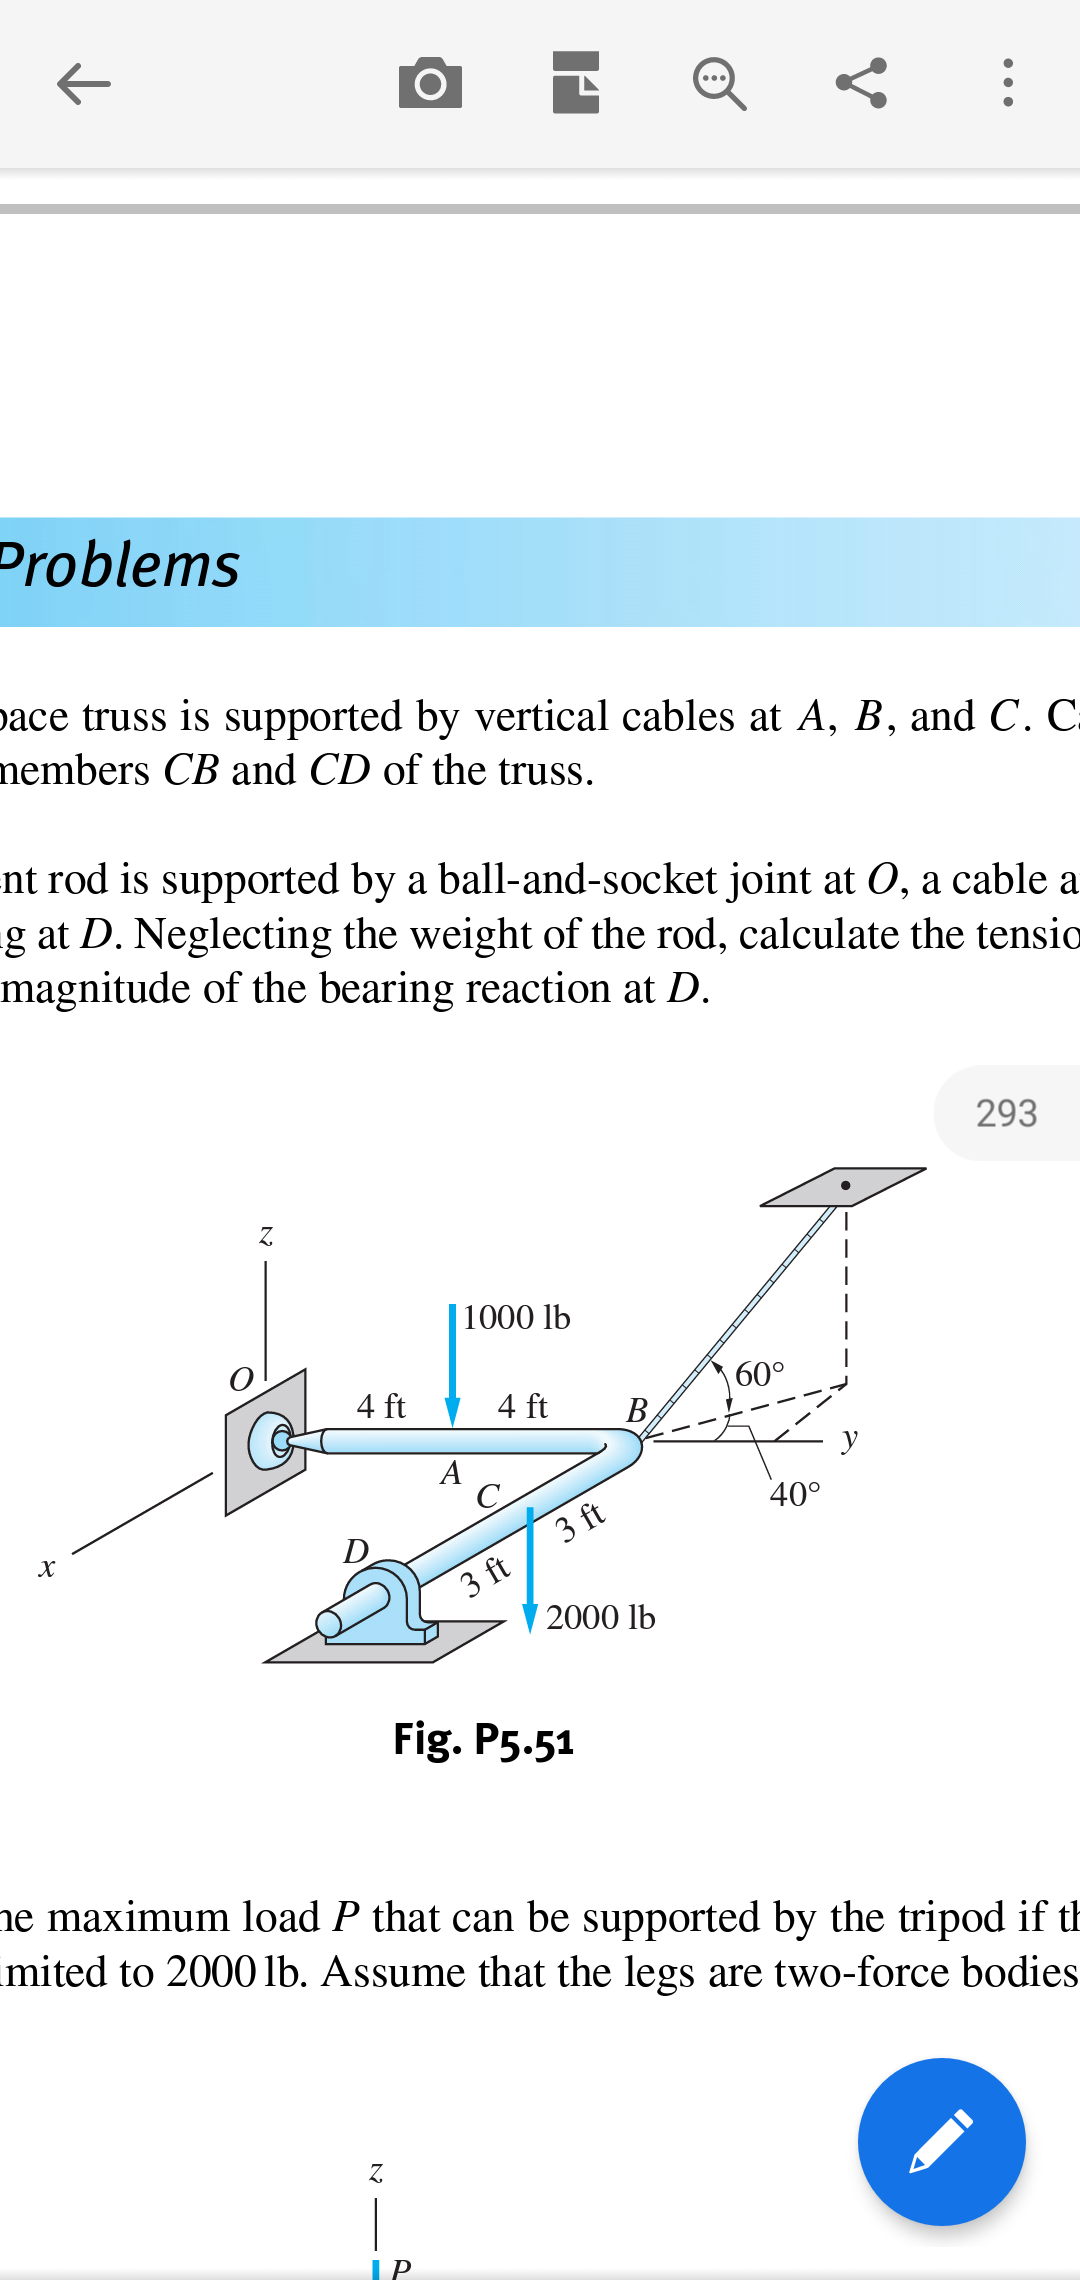 Problems
ace truss is supported by vertical cables at A, B, and C. C.
members CB and CD of the truss.
nt rod is supported by a ball-and-socket joint at 0, a cable a
-g at D. Neglecting the weight of the rod, calculate the tensio
magnitude of the bearing reaction at D
293
Z.
|1000 lb
60°
4 ft
4 ft
В,
А
С
400
3 ft
D
3 ft
2000 lb
Fig. P5.51
ne maximum load P that can be supported by the tripod if th
mited to 2000 lb. Assume that the legs are two-force bodies
Z
|
ГP
